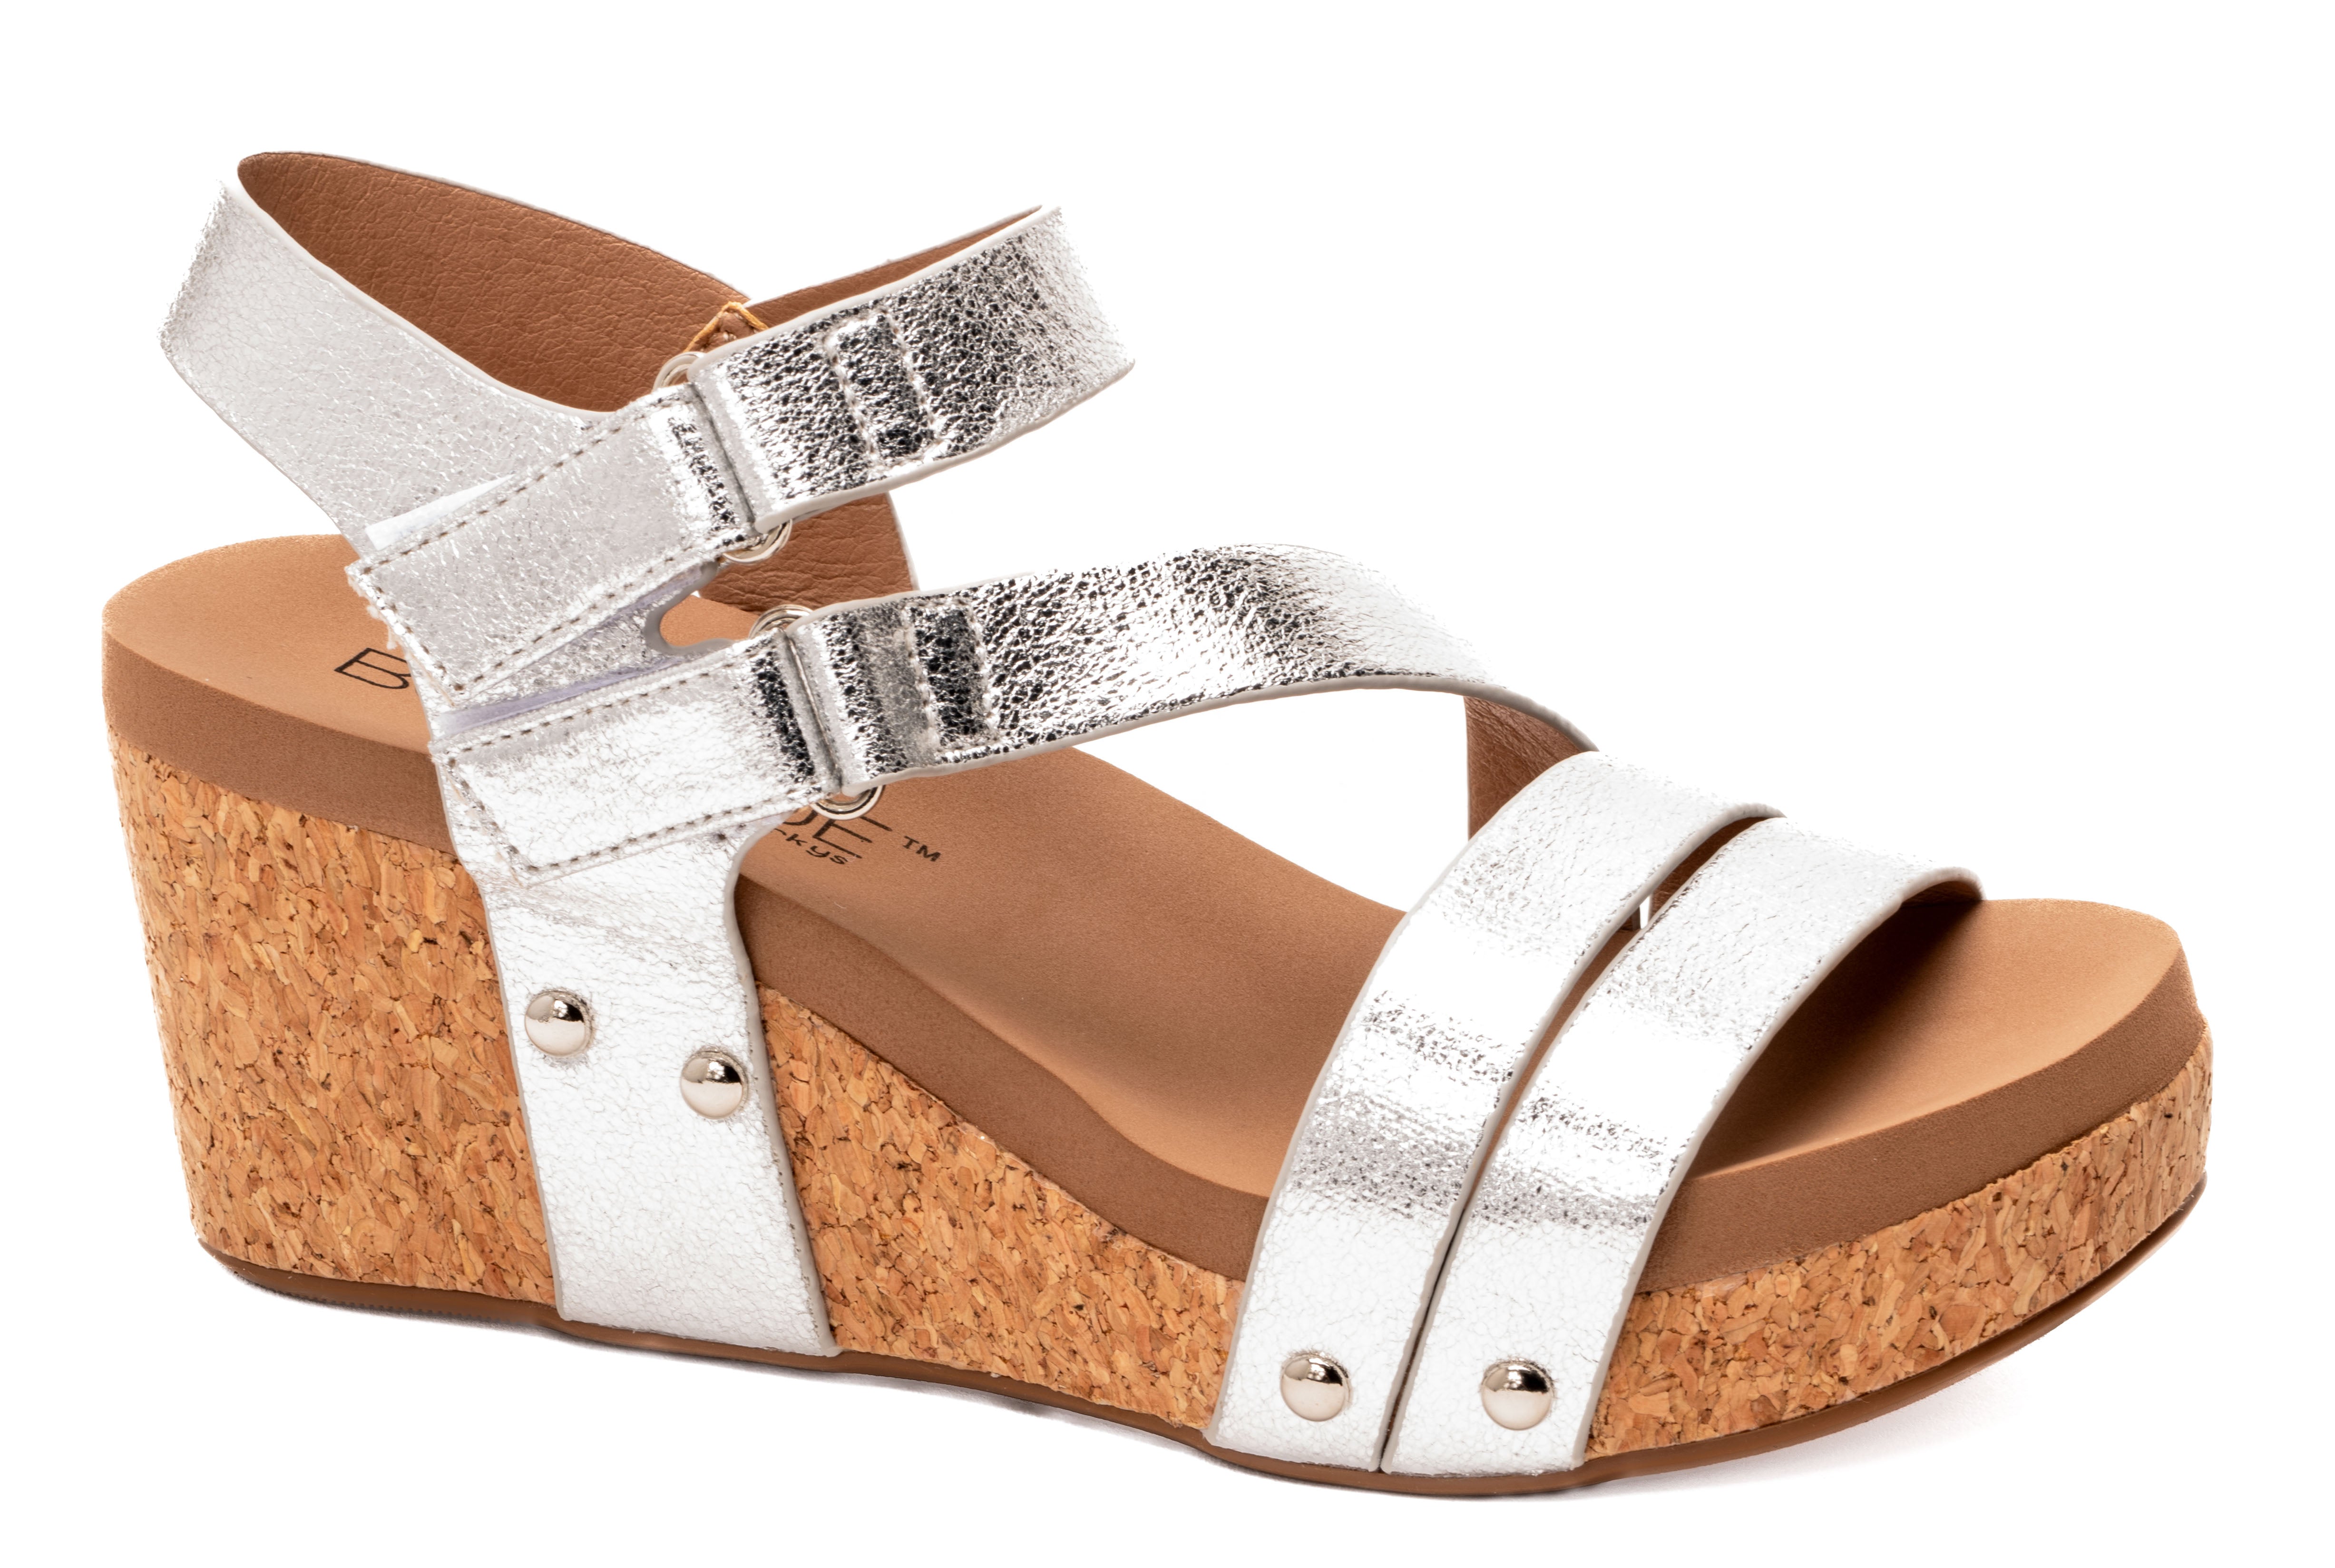 Market Live Preorder: Giggle Wedge by Corky’s (Ships in 2-3 Weeks)